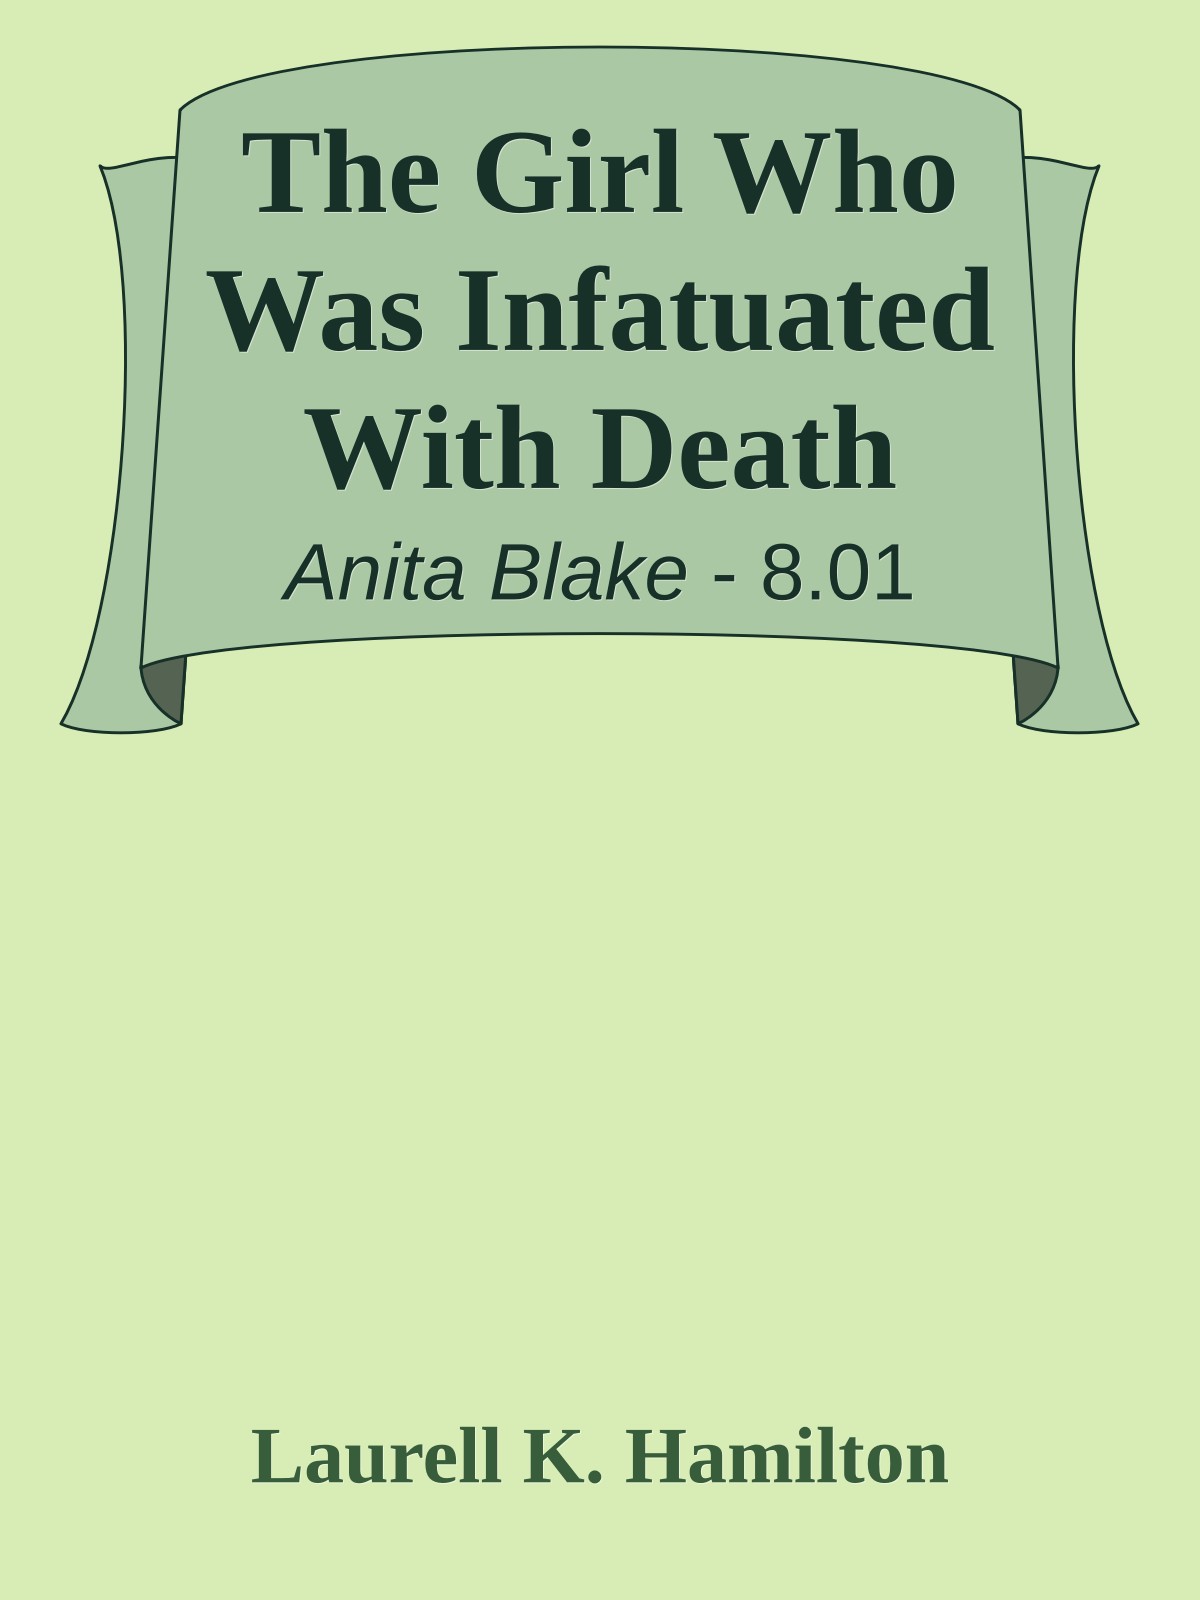 The Girl Who Was Infatuated With Death